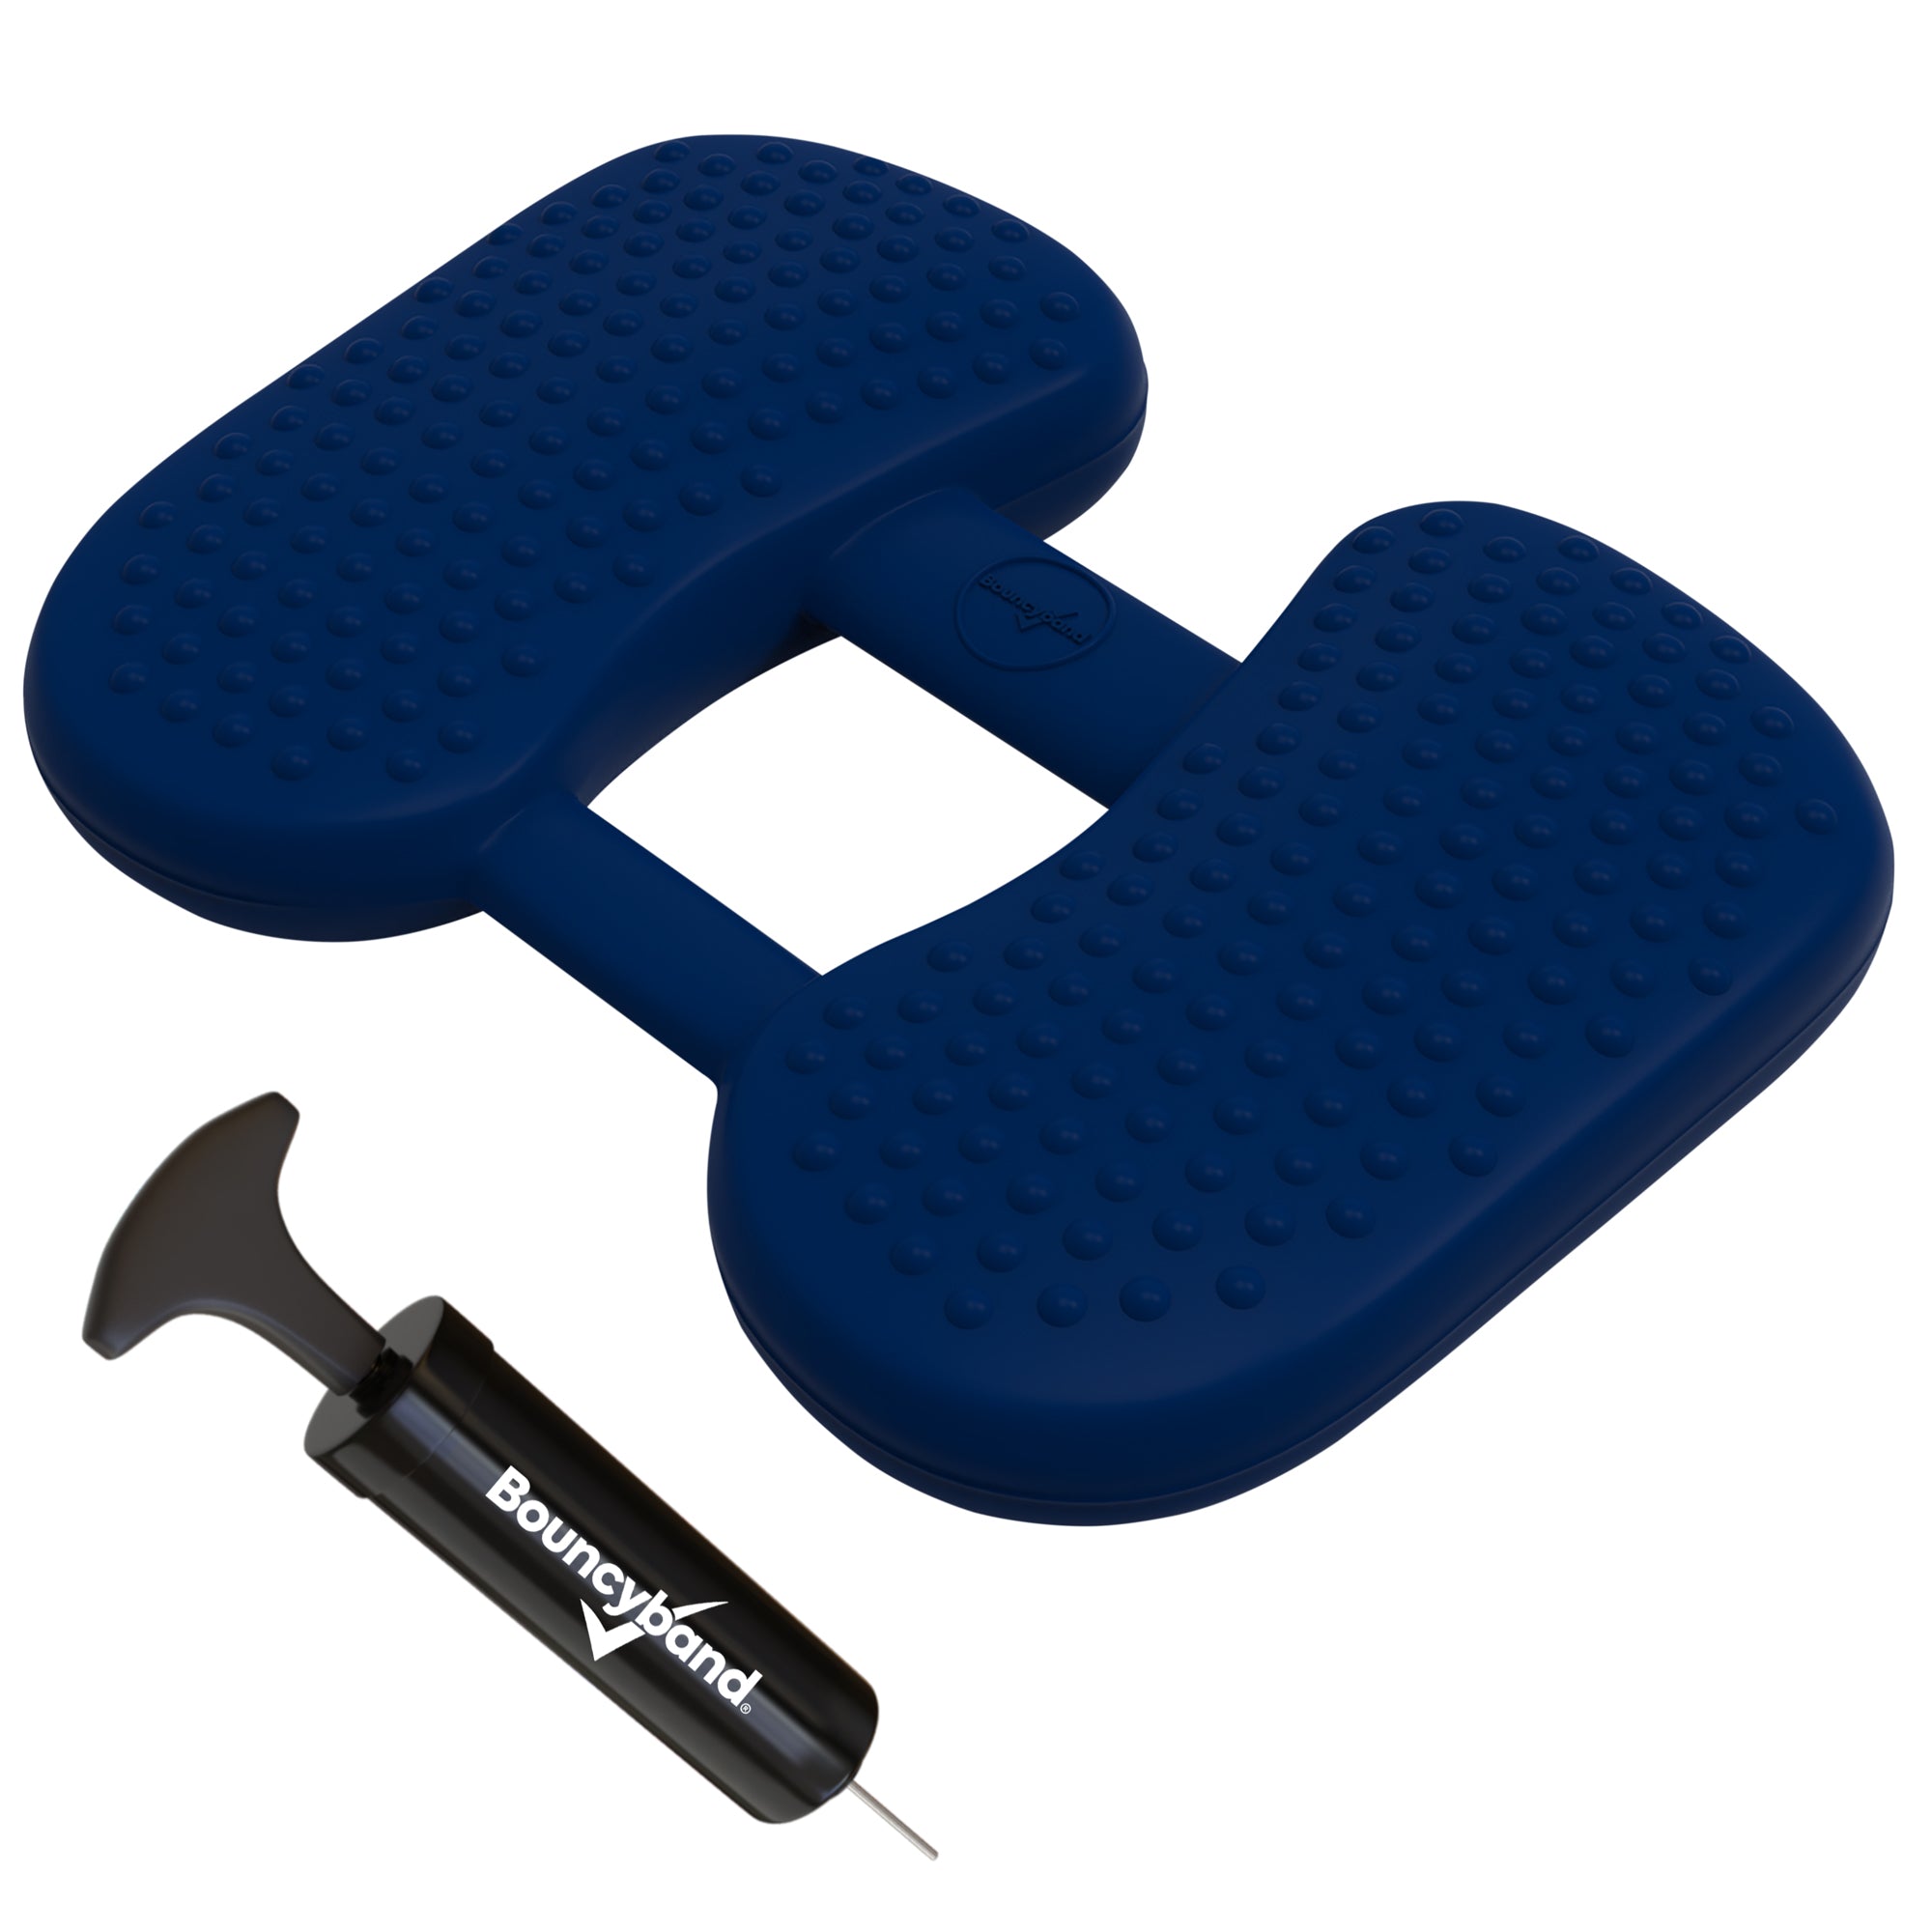 Foot Roller by Bouncyband®